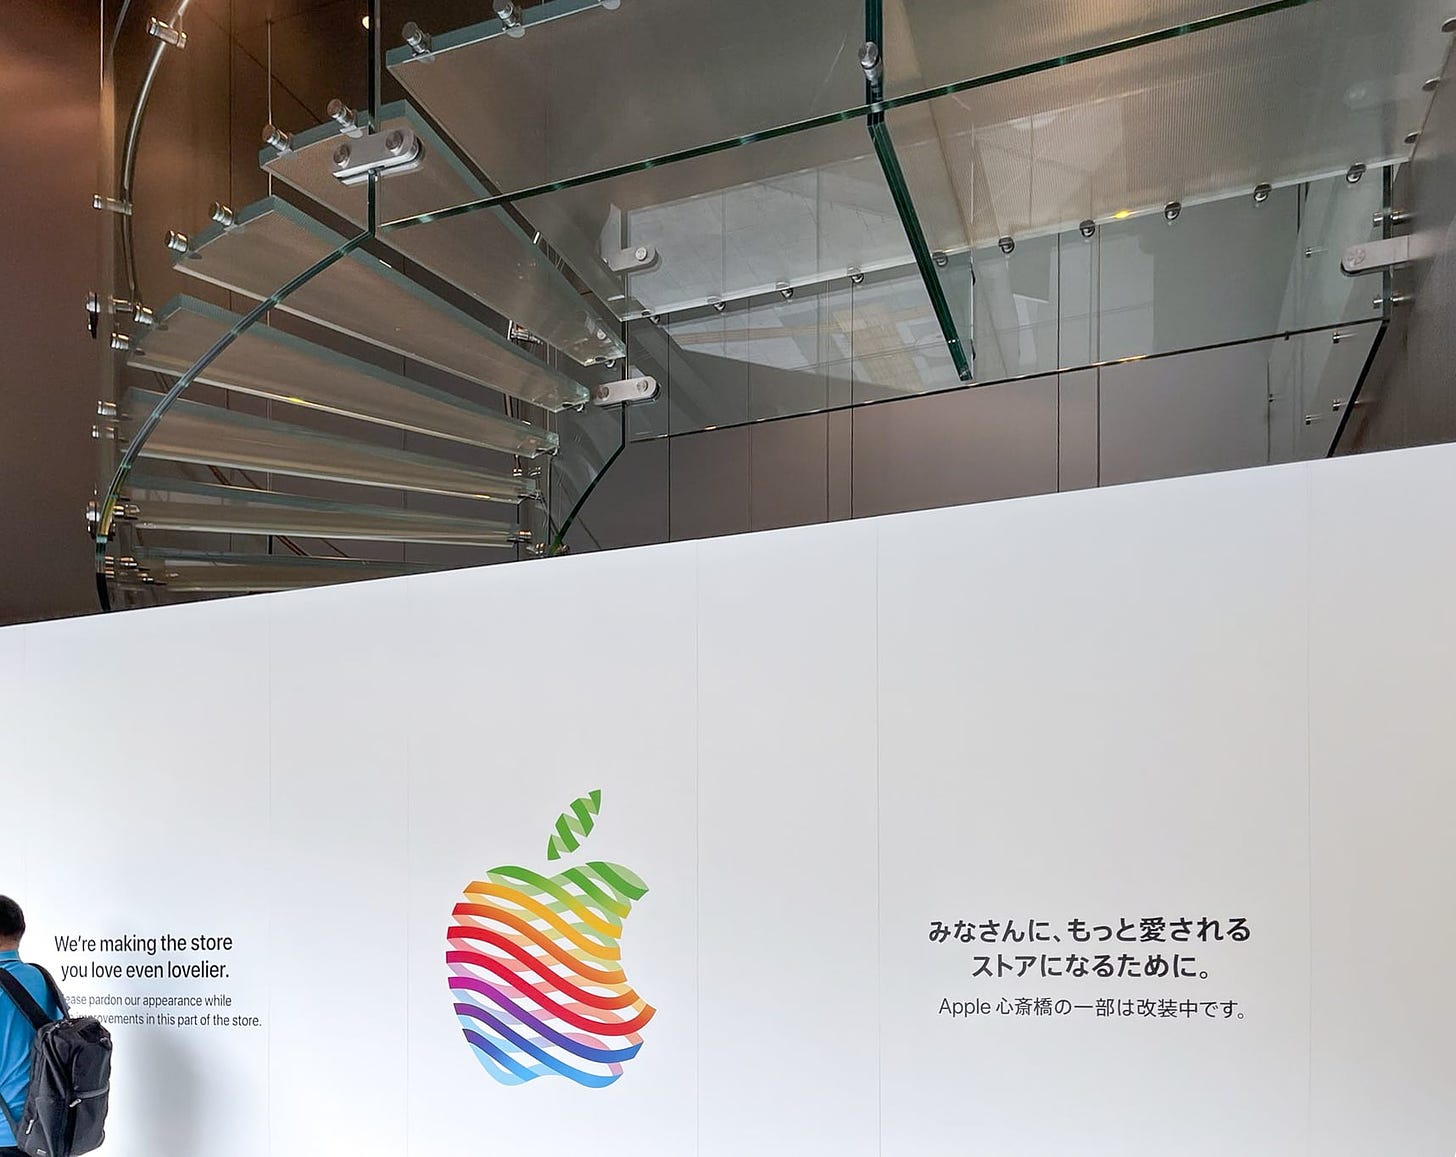 An interior shot of the first floor at Apple Shinsaibashi. A large white wall with the heritage logo blocks access to the second level and spiral glass staircase. The wall says "We're making the store you love even lovelier."